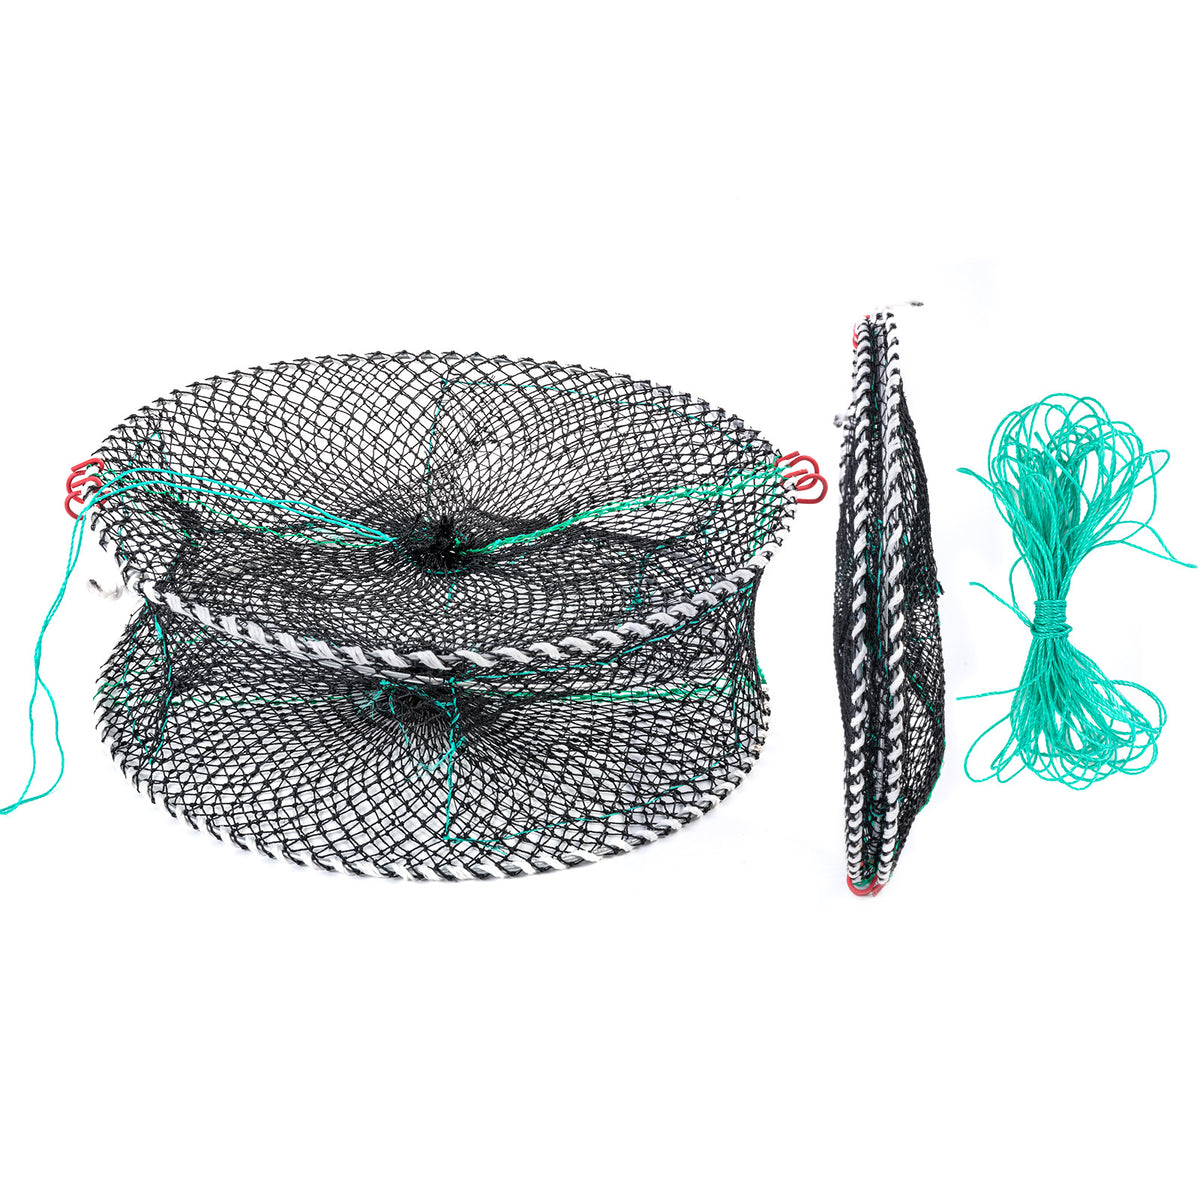 Goture Collapsible Folded Crab Trap Fishing Net Minnow Fish Crayfish Crawdad Shrimp Bait Trap with Rope 8 12 16 18 Holes